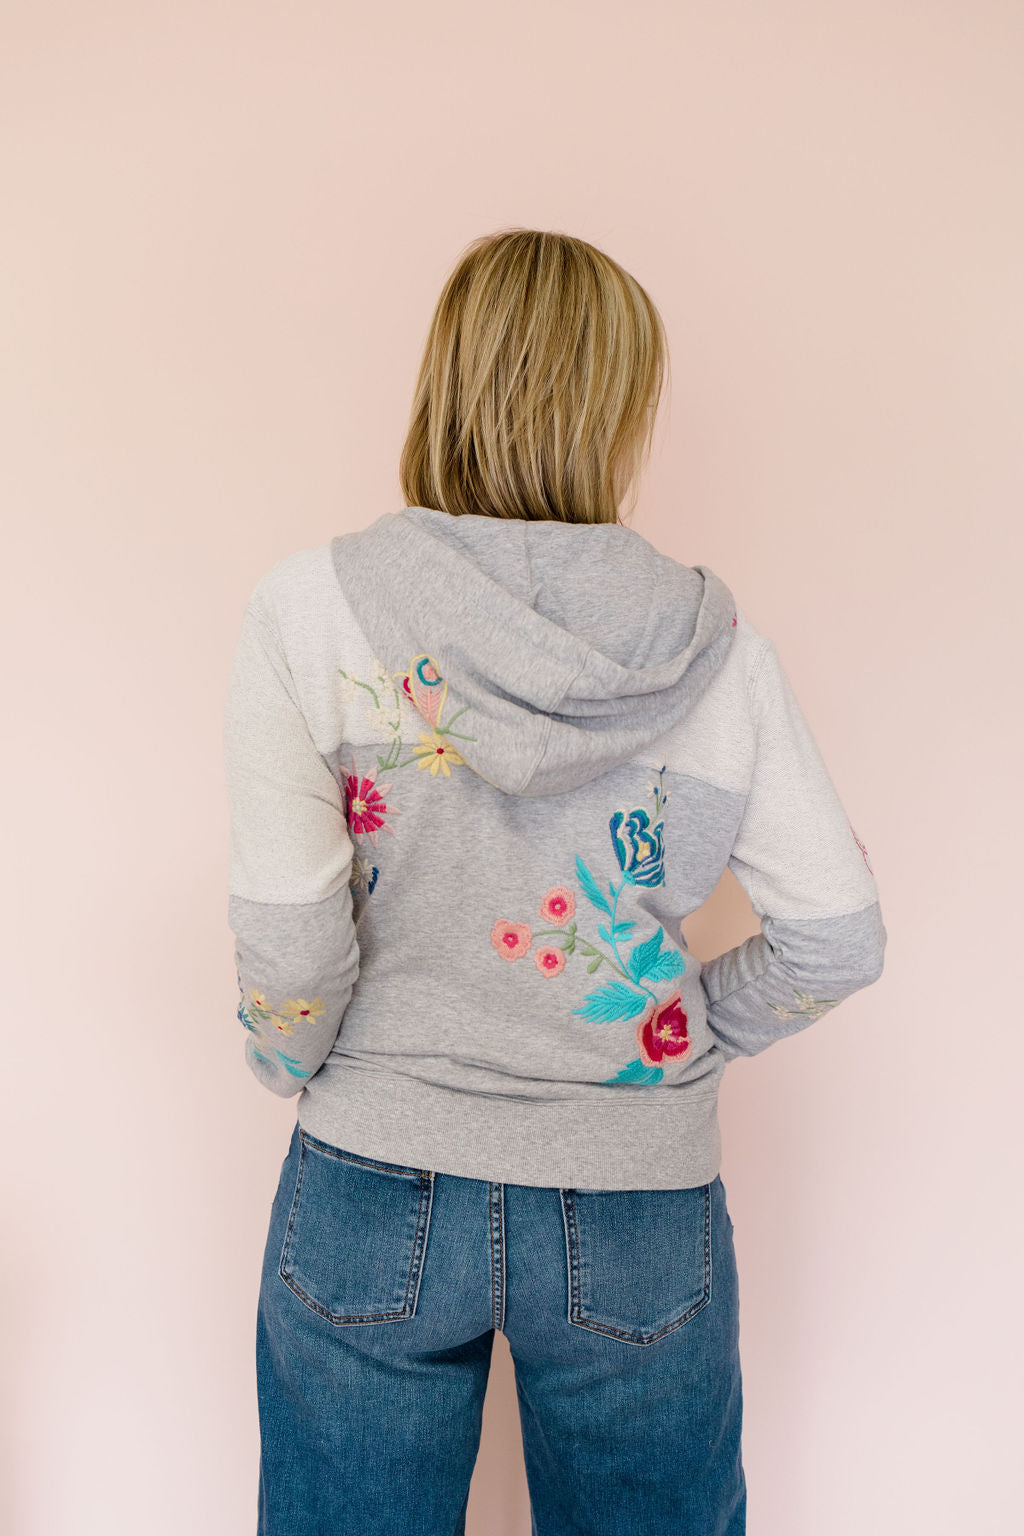 Embroidered French-Terry Sweatshirt for Women